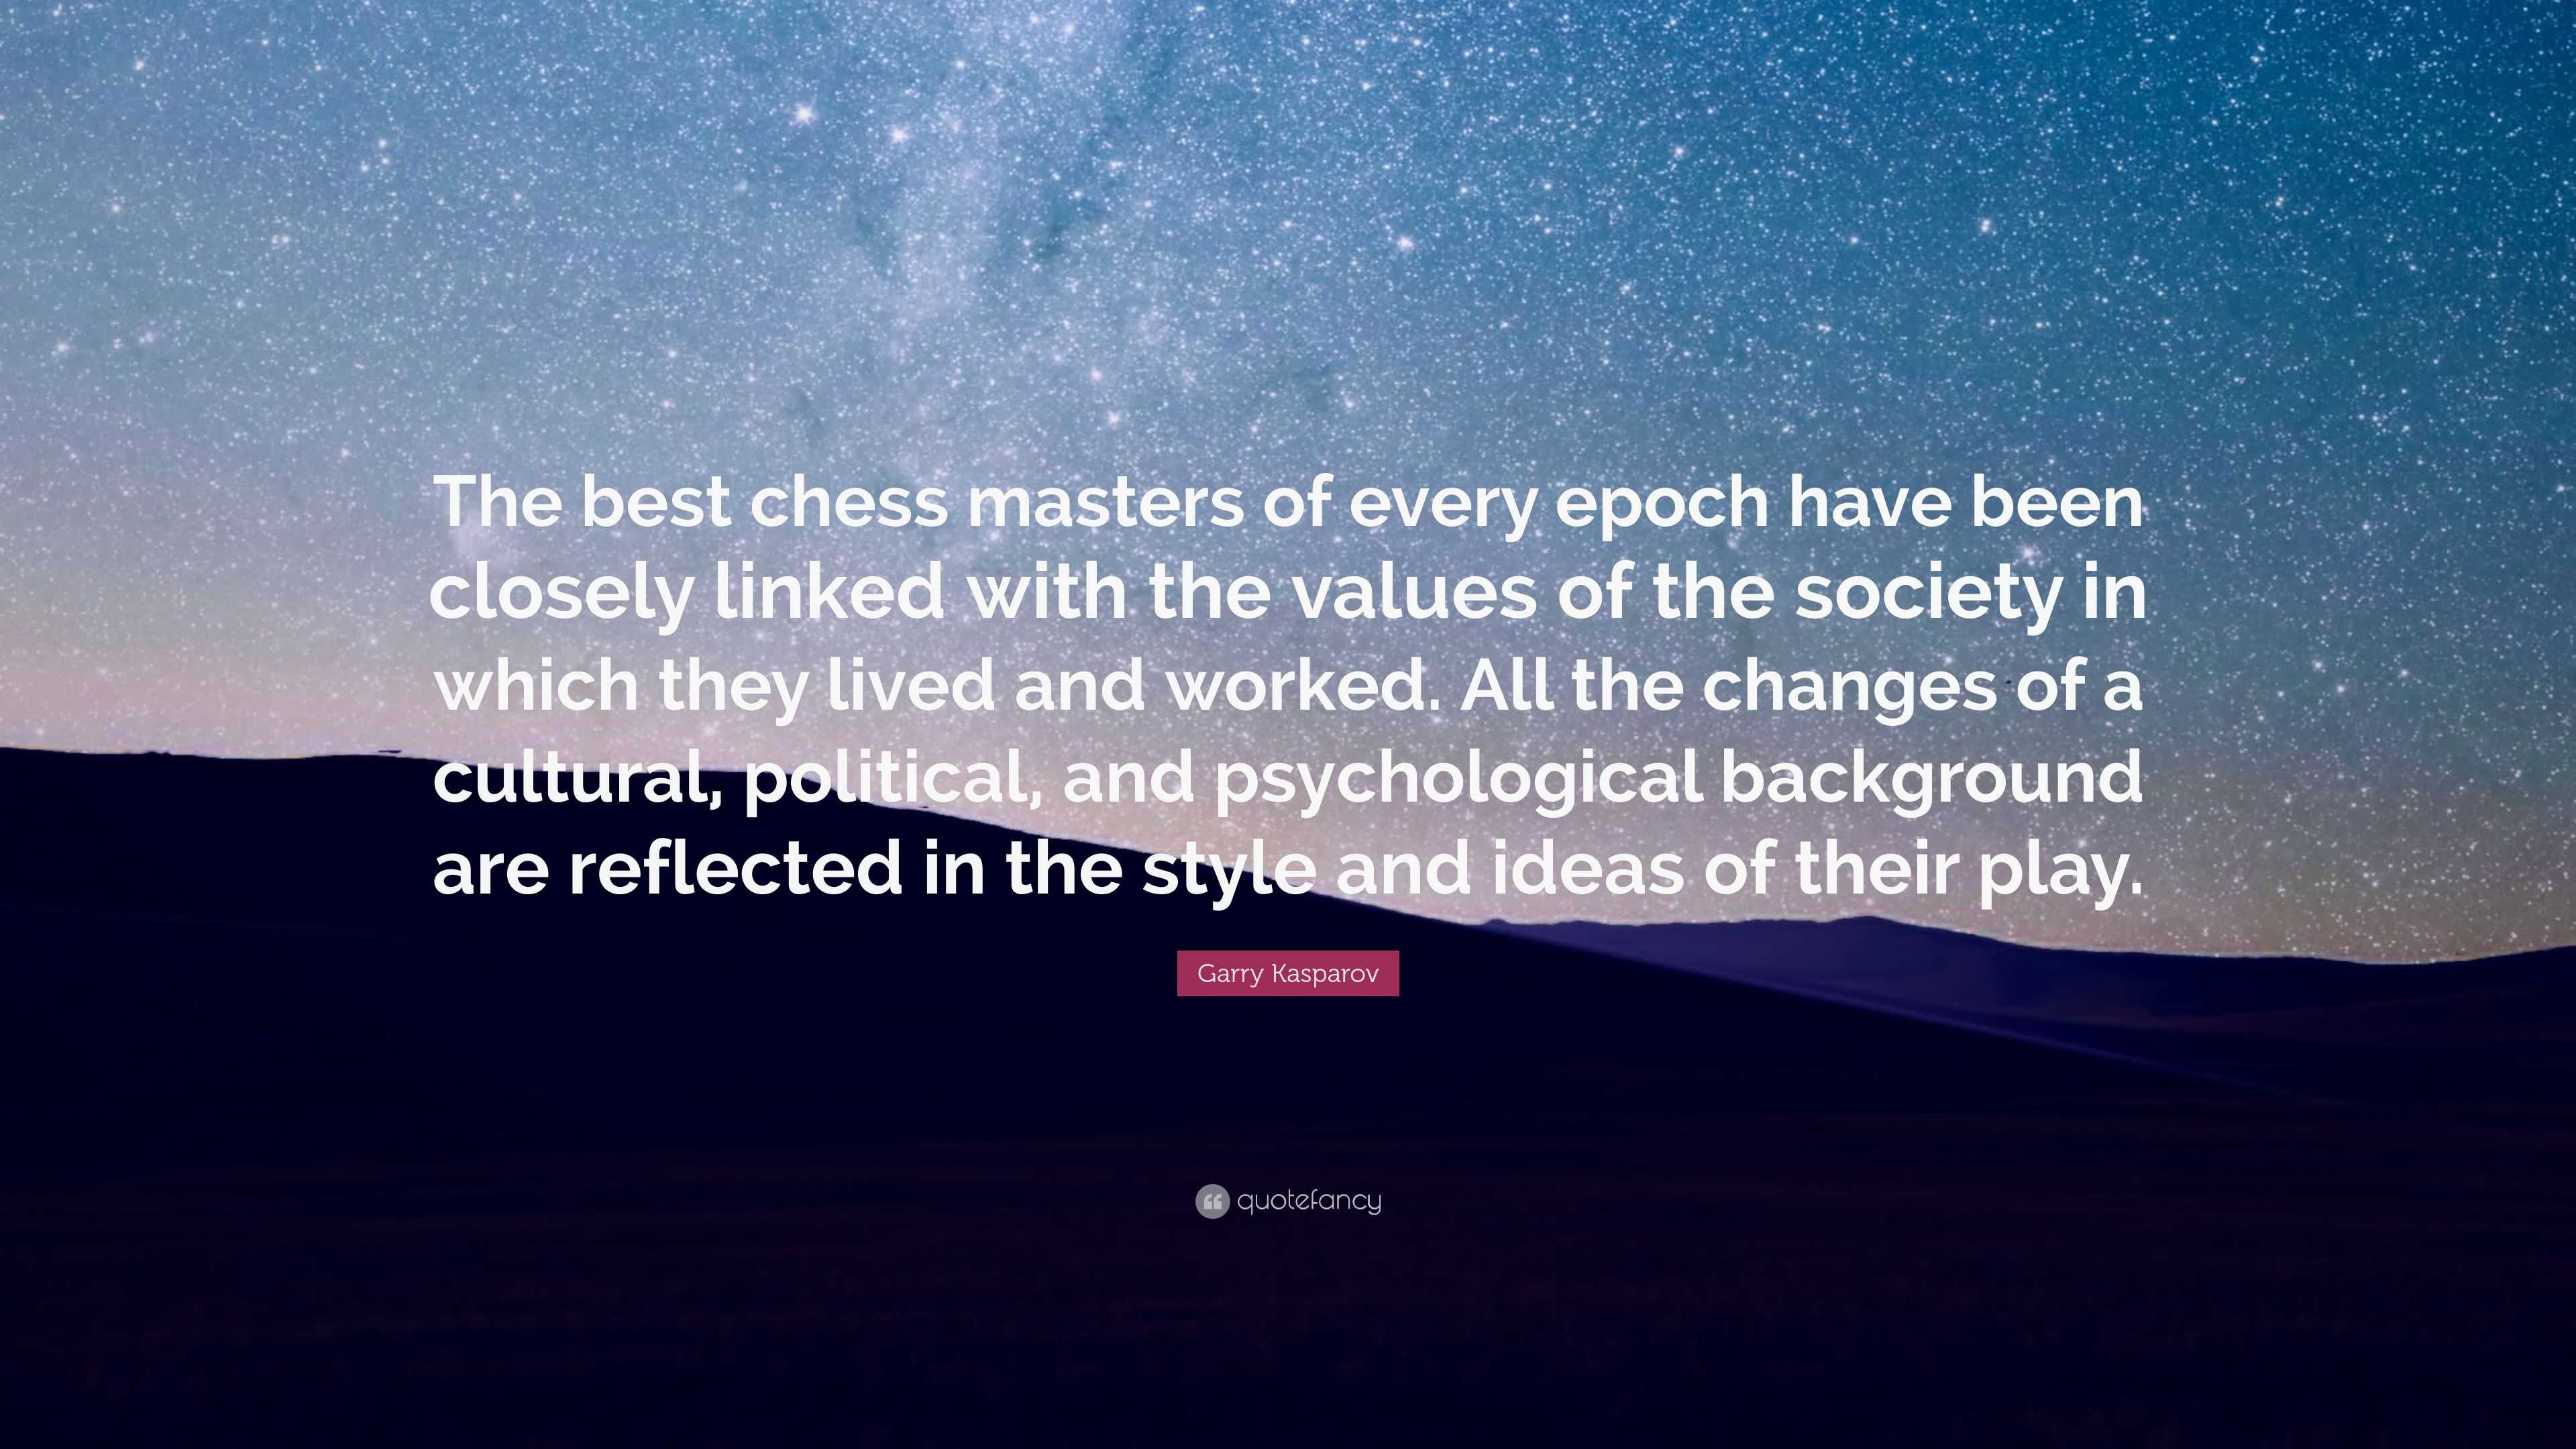 Who do you think is the most overrated historical chess player? Who is the  most underappreciated? - Quora